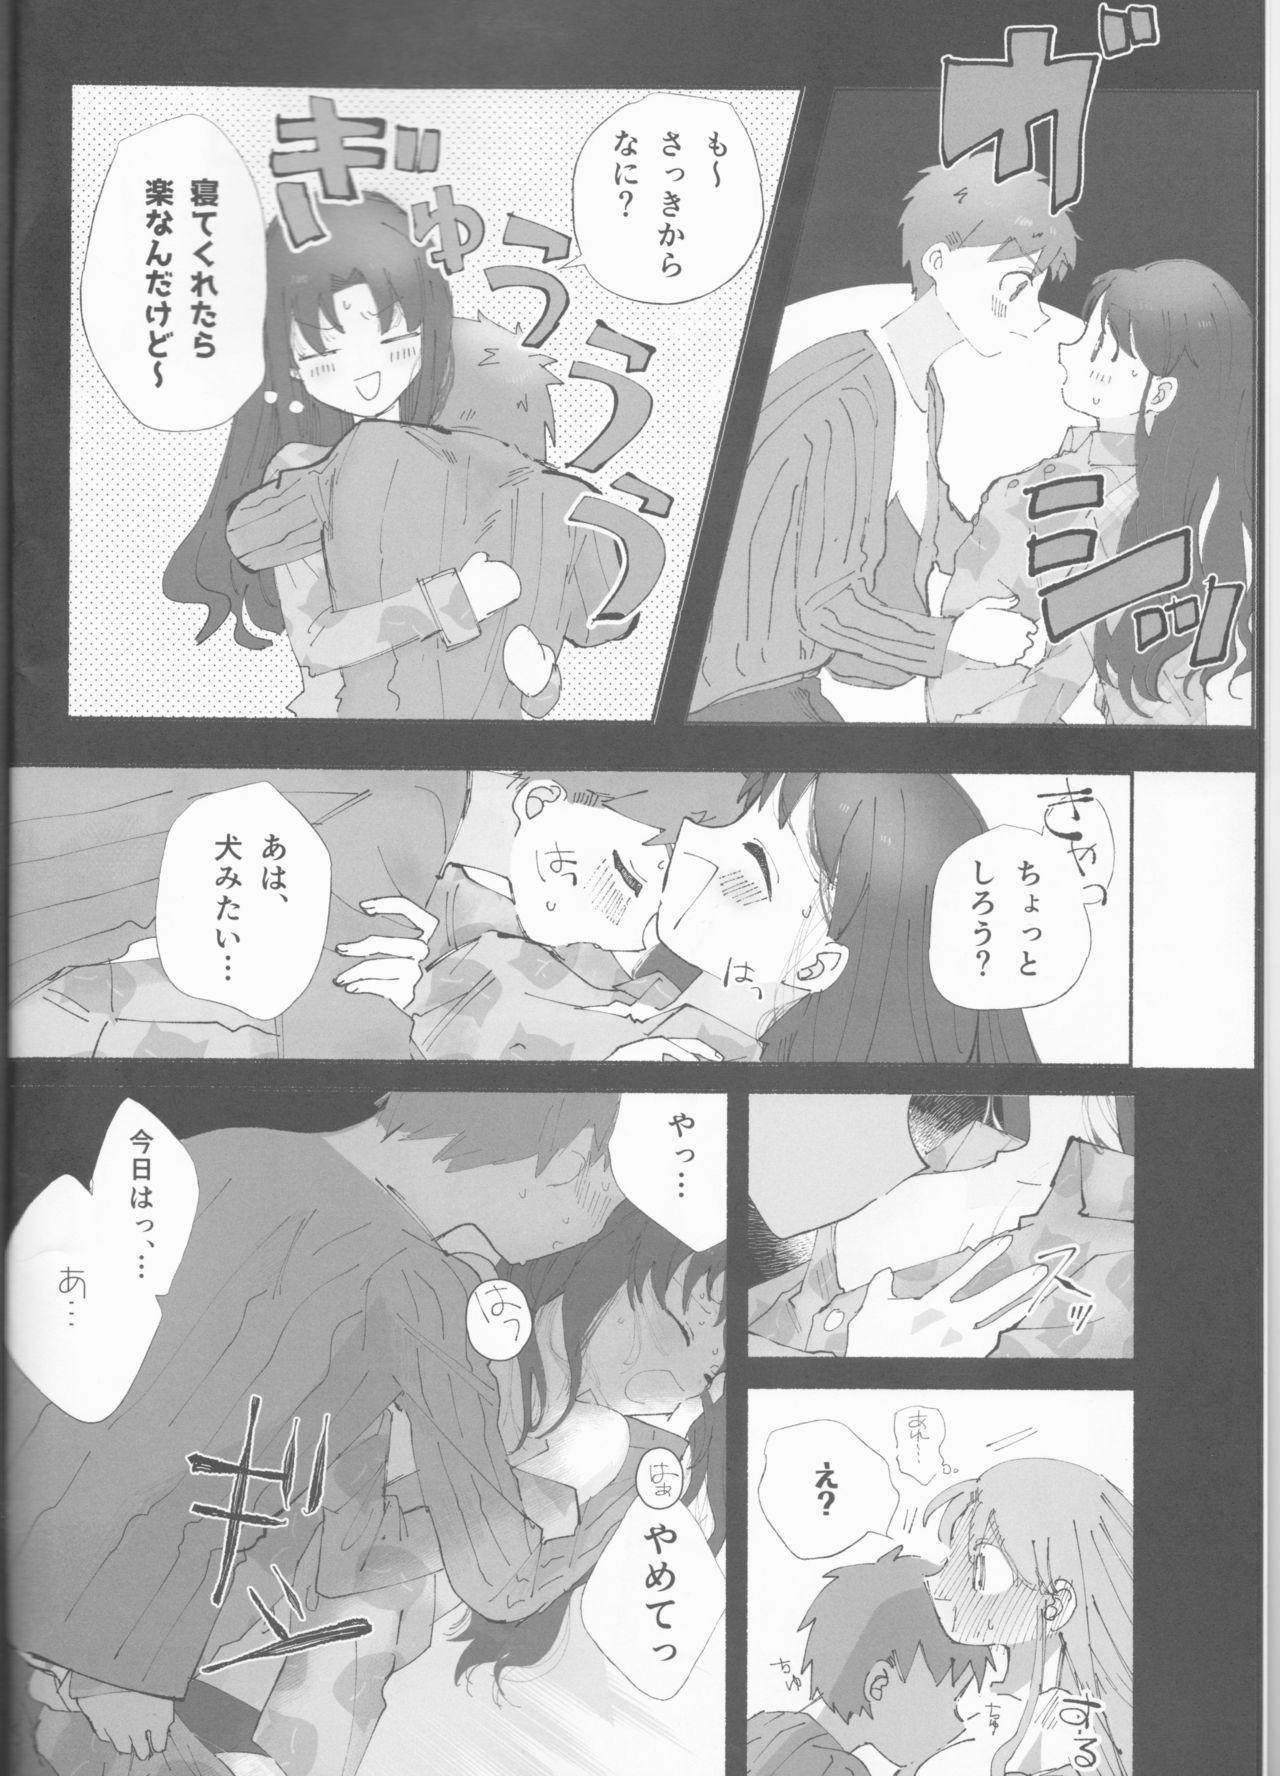 Guys TRAUMEREI - Fate stay night Black Girl - Page 7